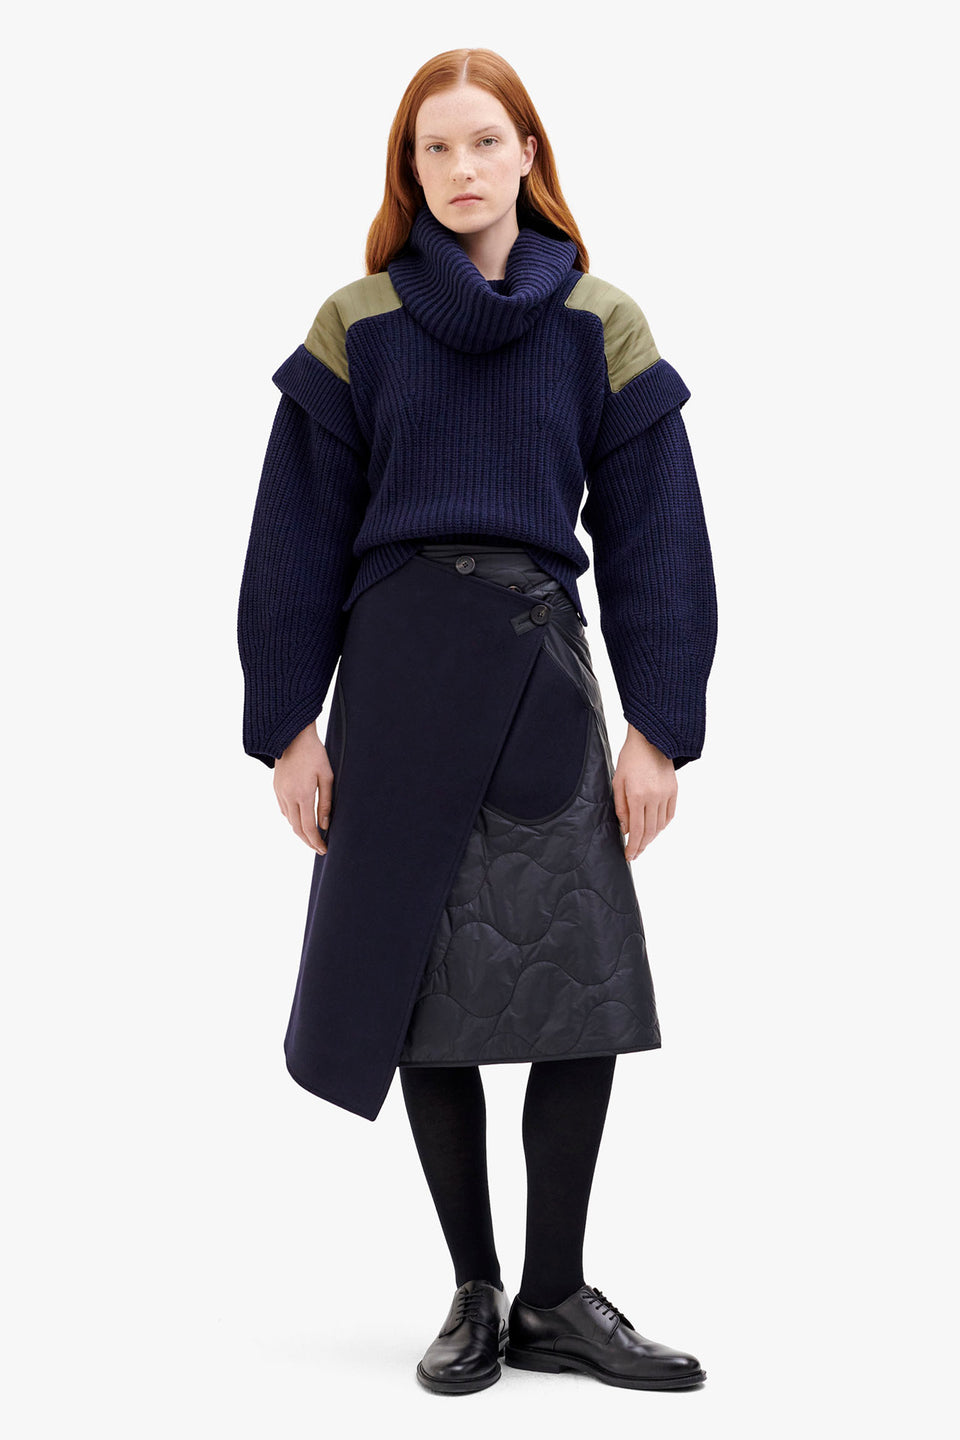 Wool Quilt Skirt - Navy / Black (listing page thumbnail)